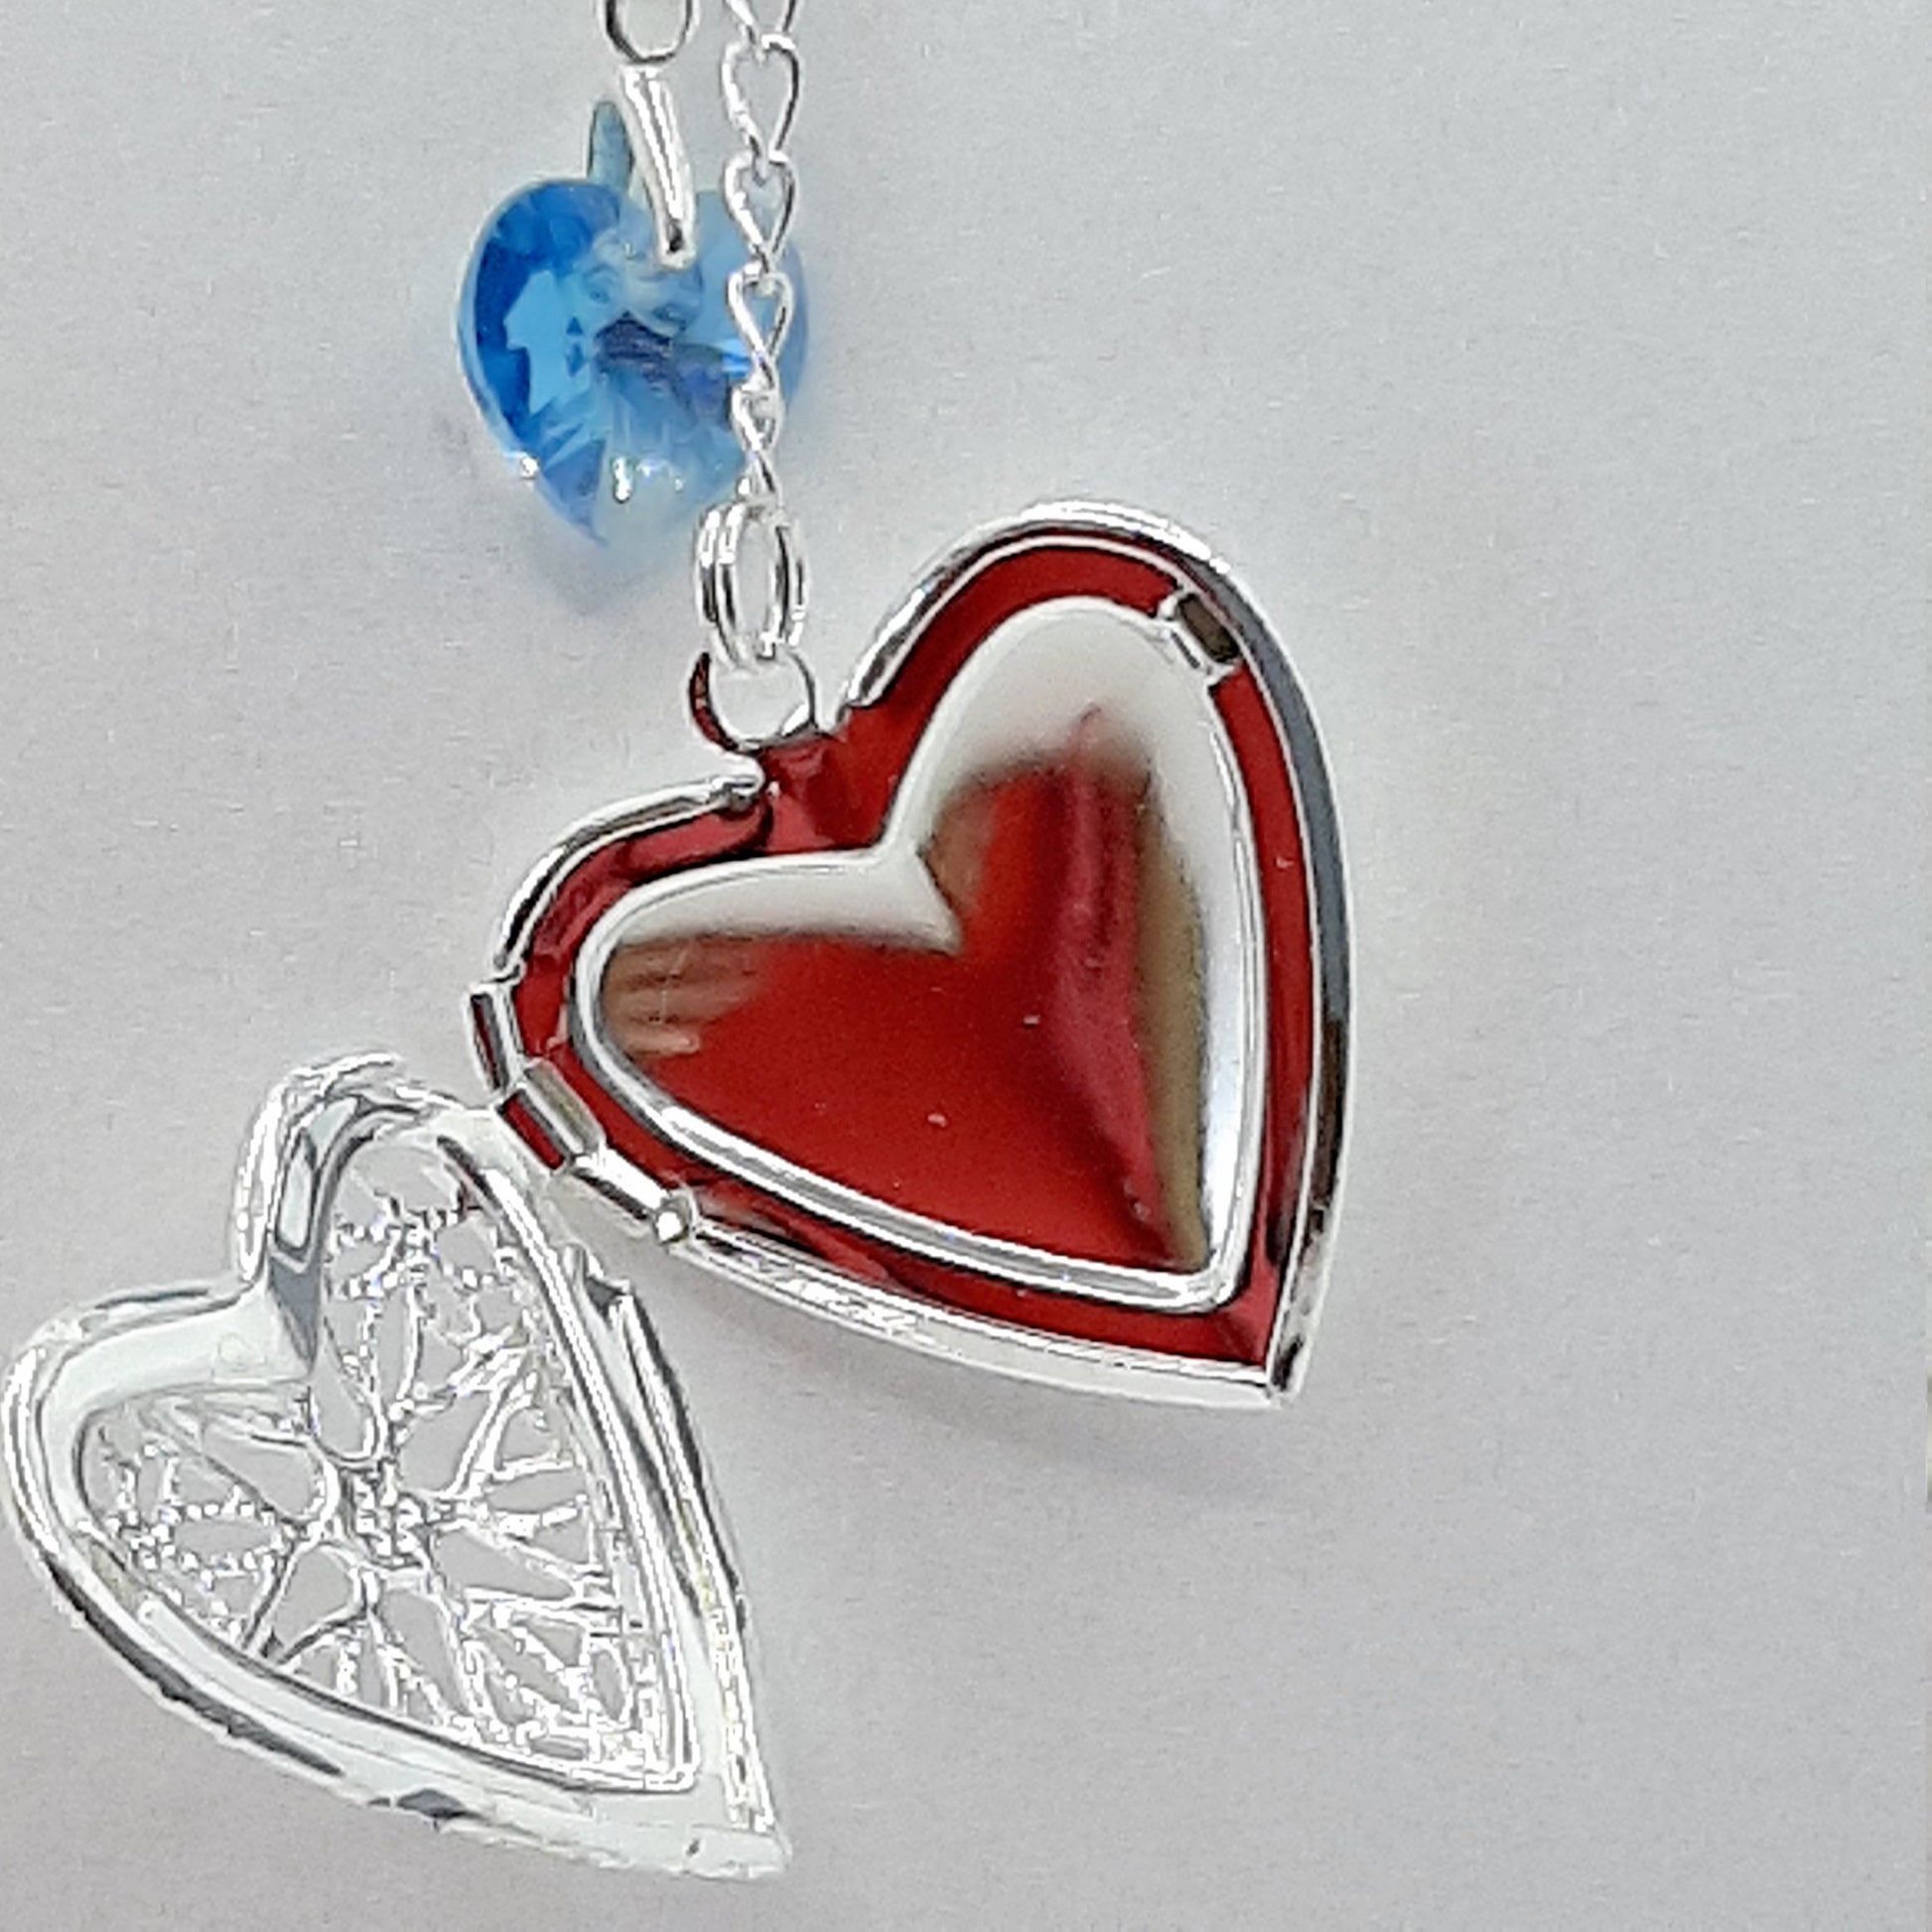 Memorial locket open and with blue crystal heart